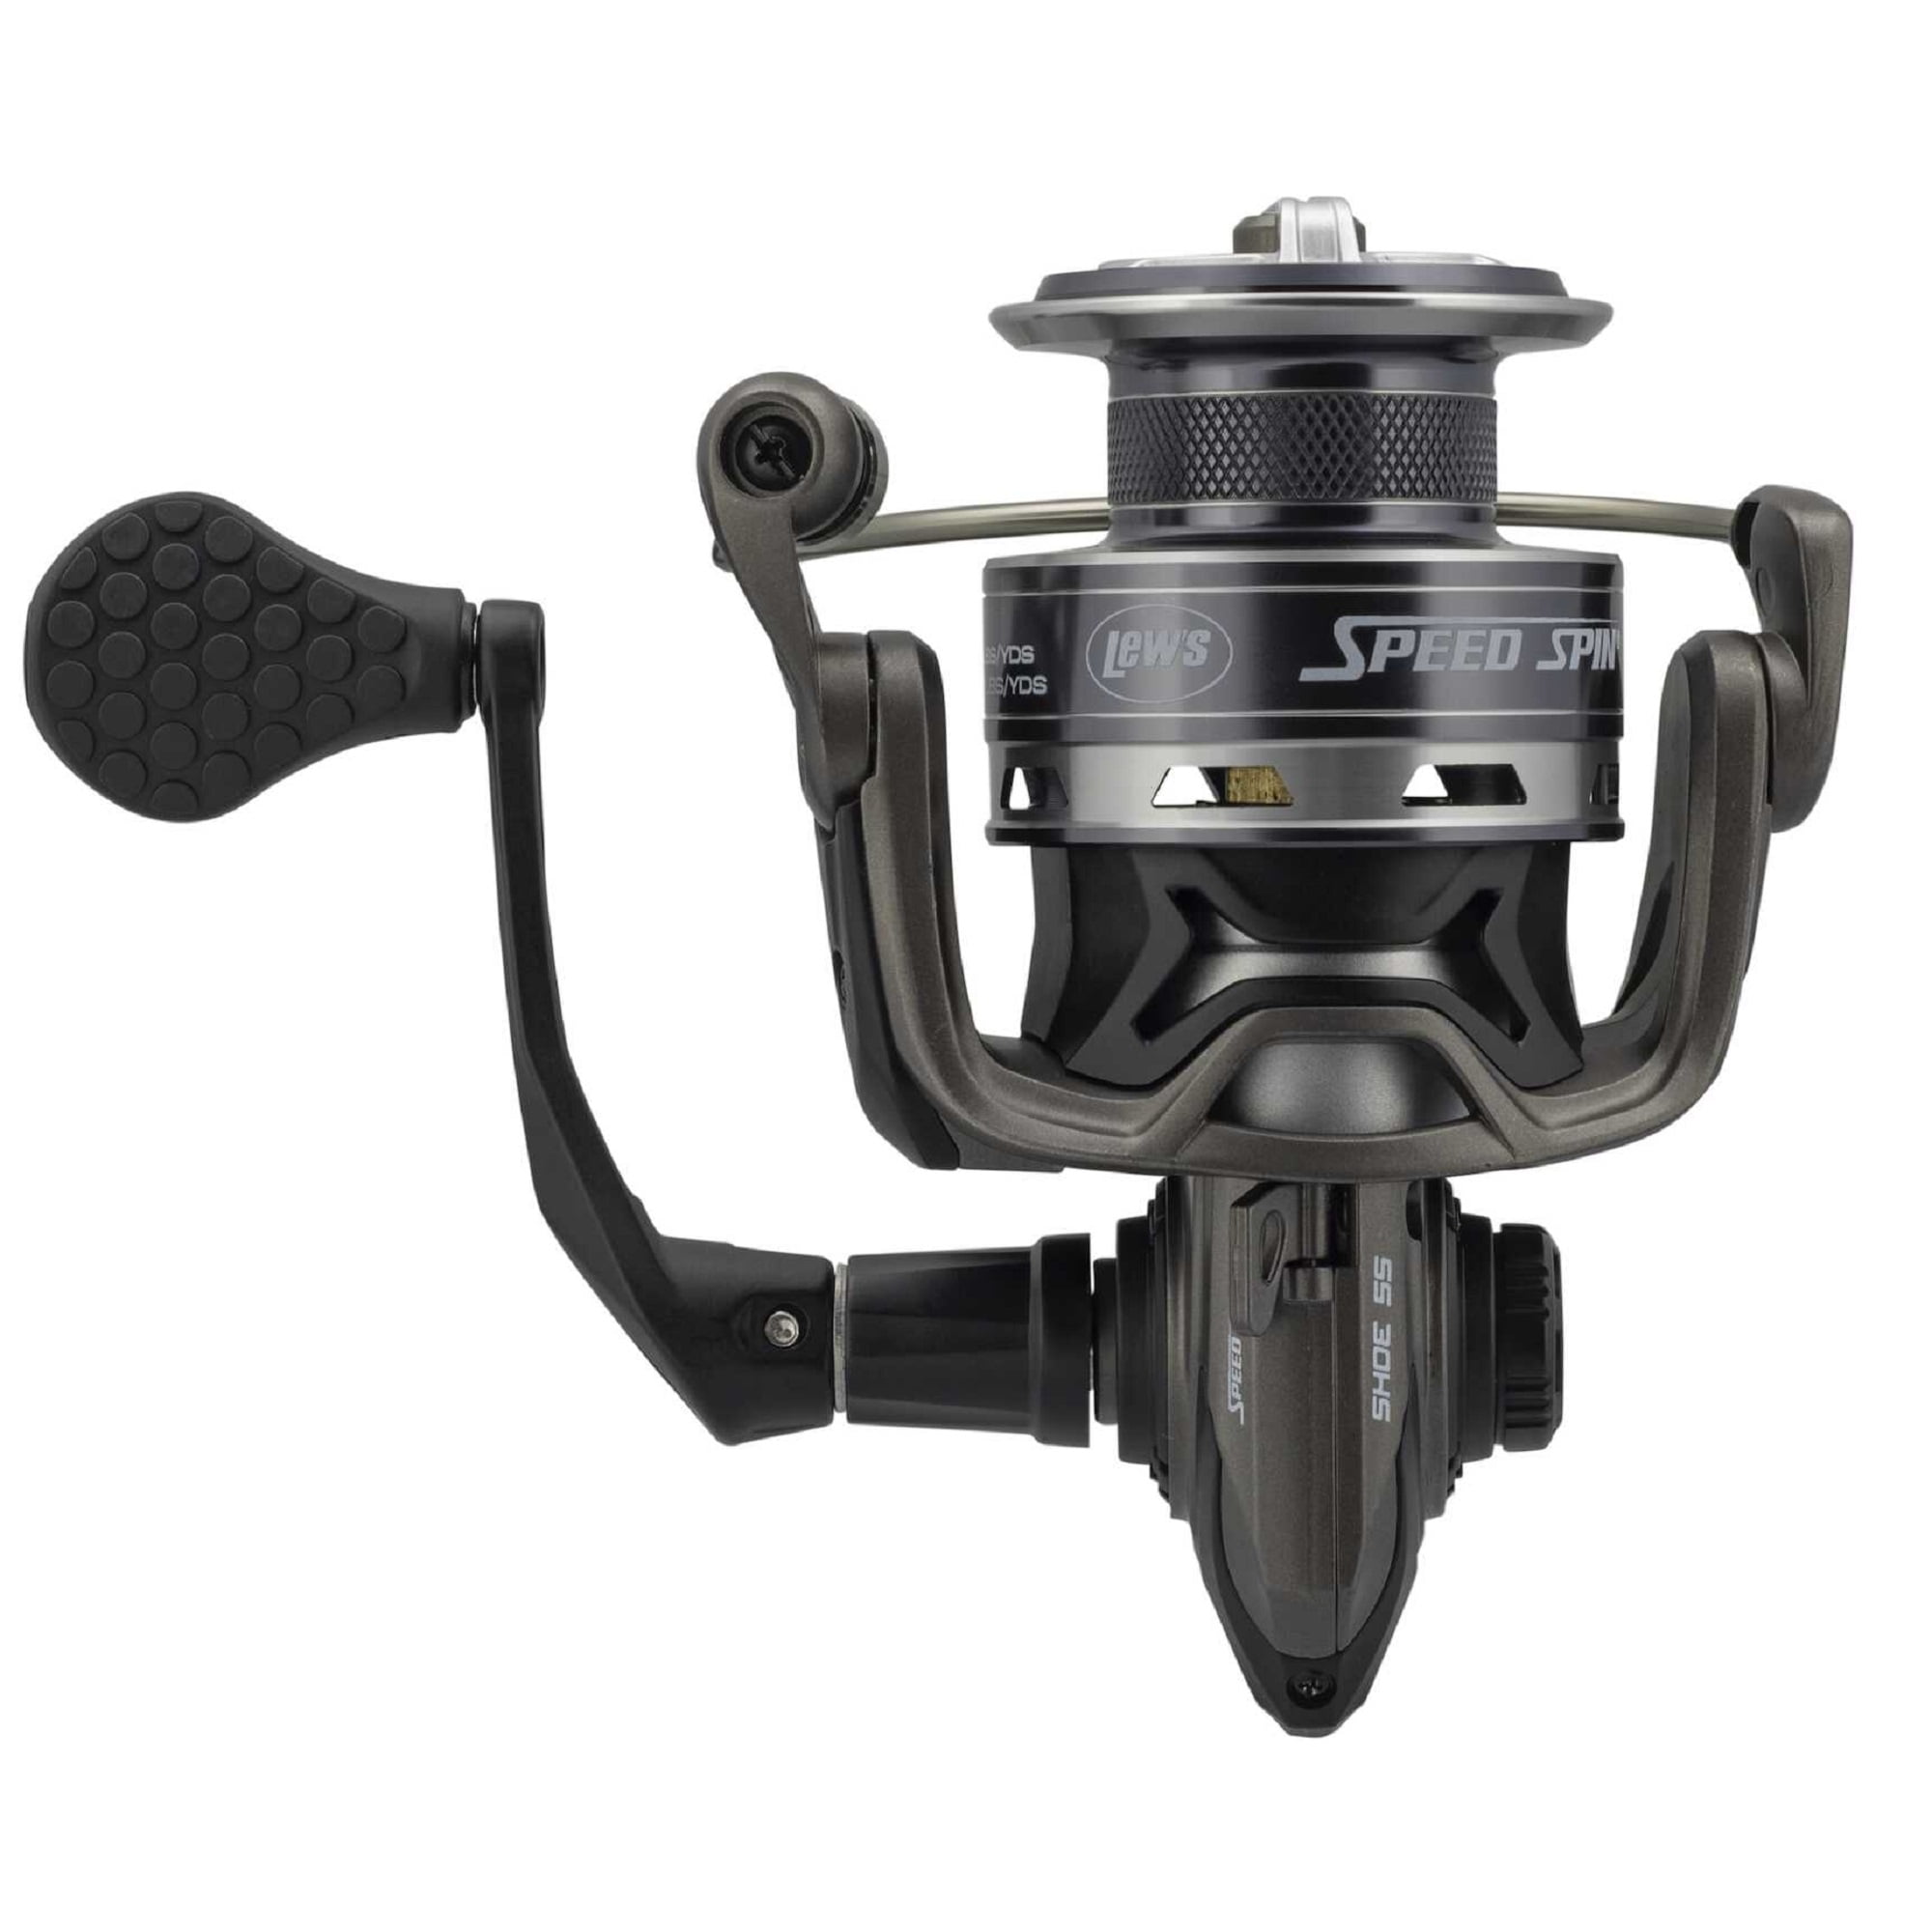 LEW'S SPEED SPIN SPINNING REEL 30 CLAM